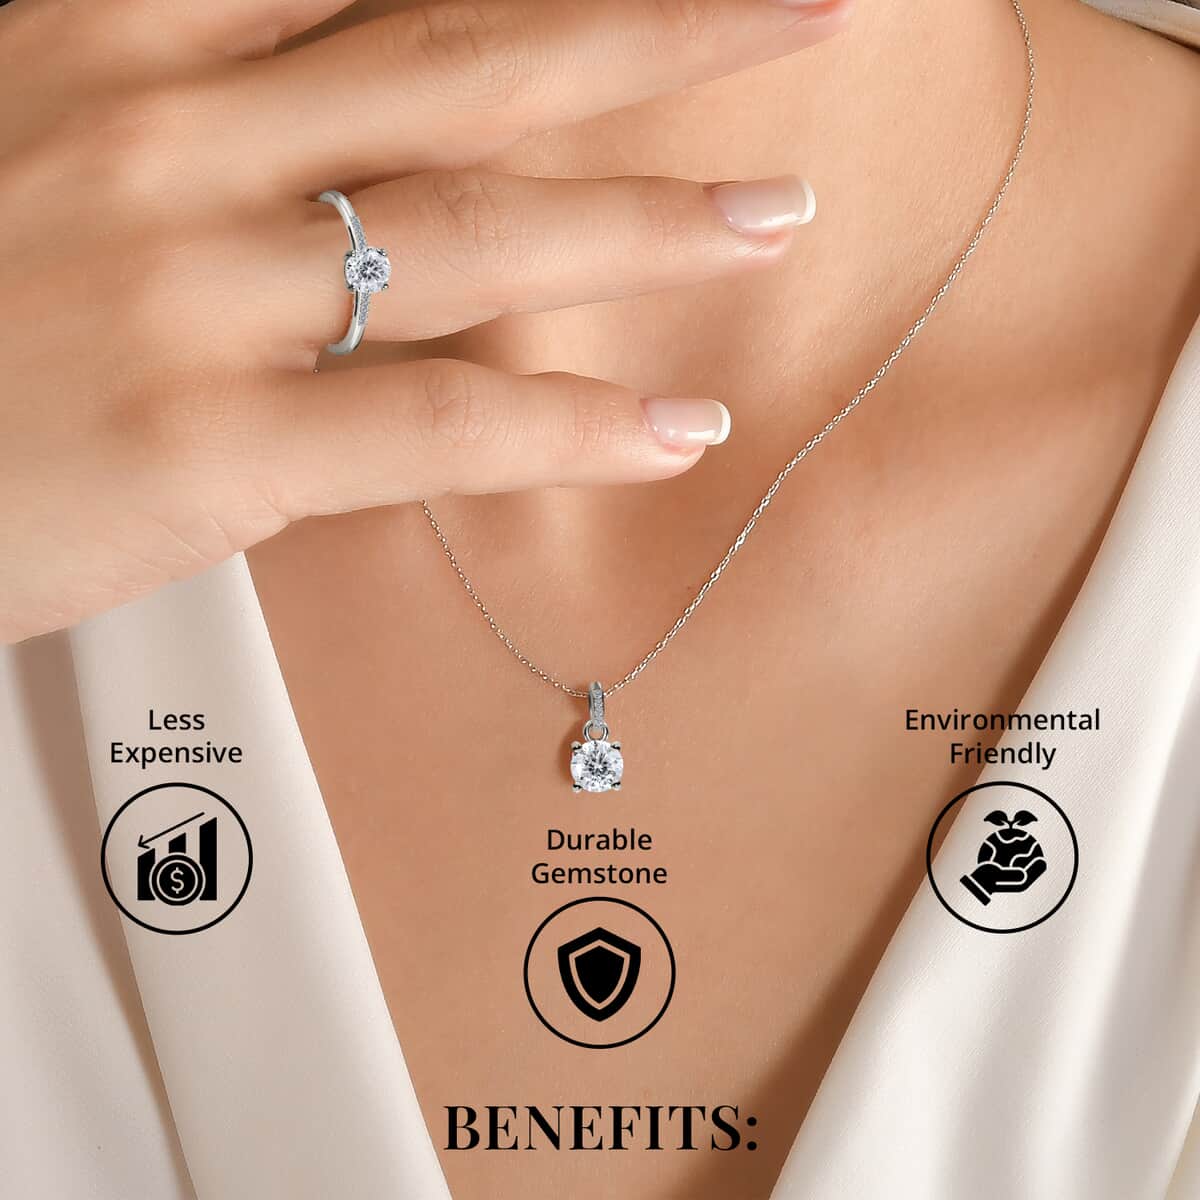 100 Facets Moissanite 1.65 ctw Solitaire Ring and Pendant Set in Platinum Over Sterling Silver , Moissanite Solitaire Ring,Jewelry Set For Her (Size 7.00) image number 3